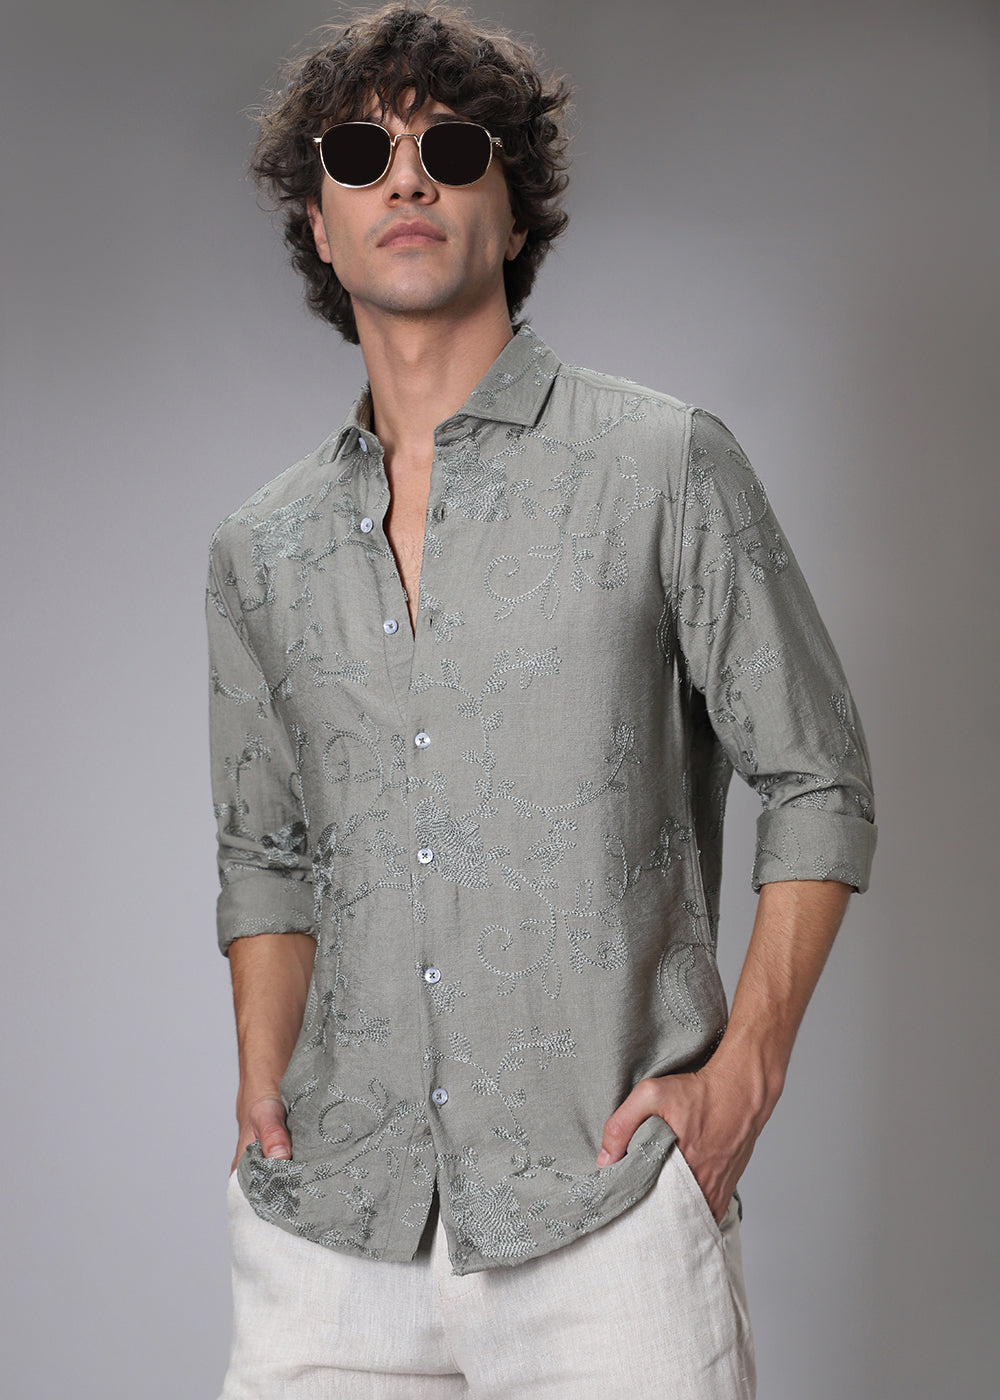 Pewter Green Floral Embroidery Shirt